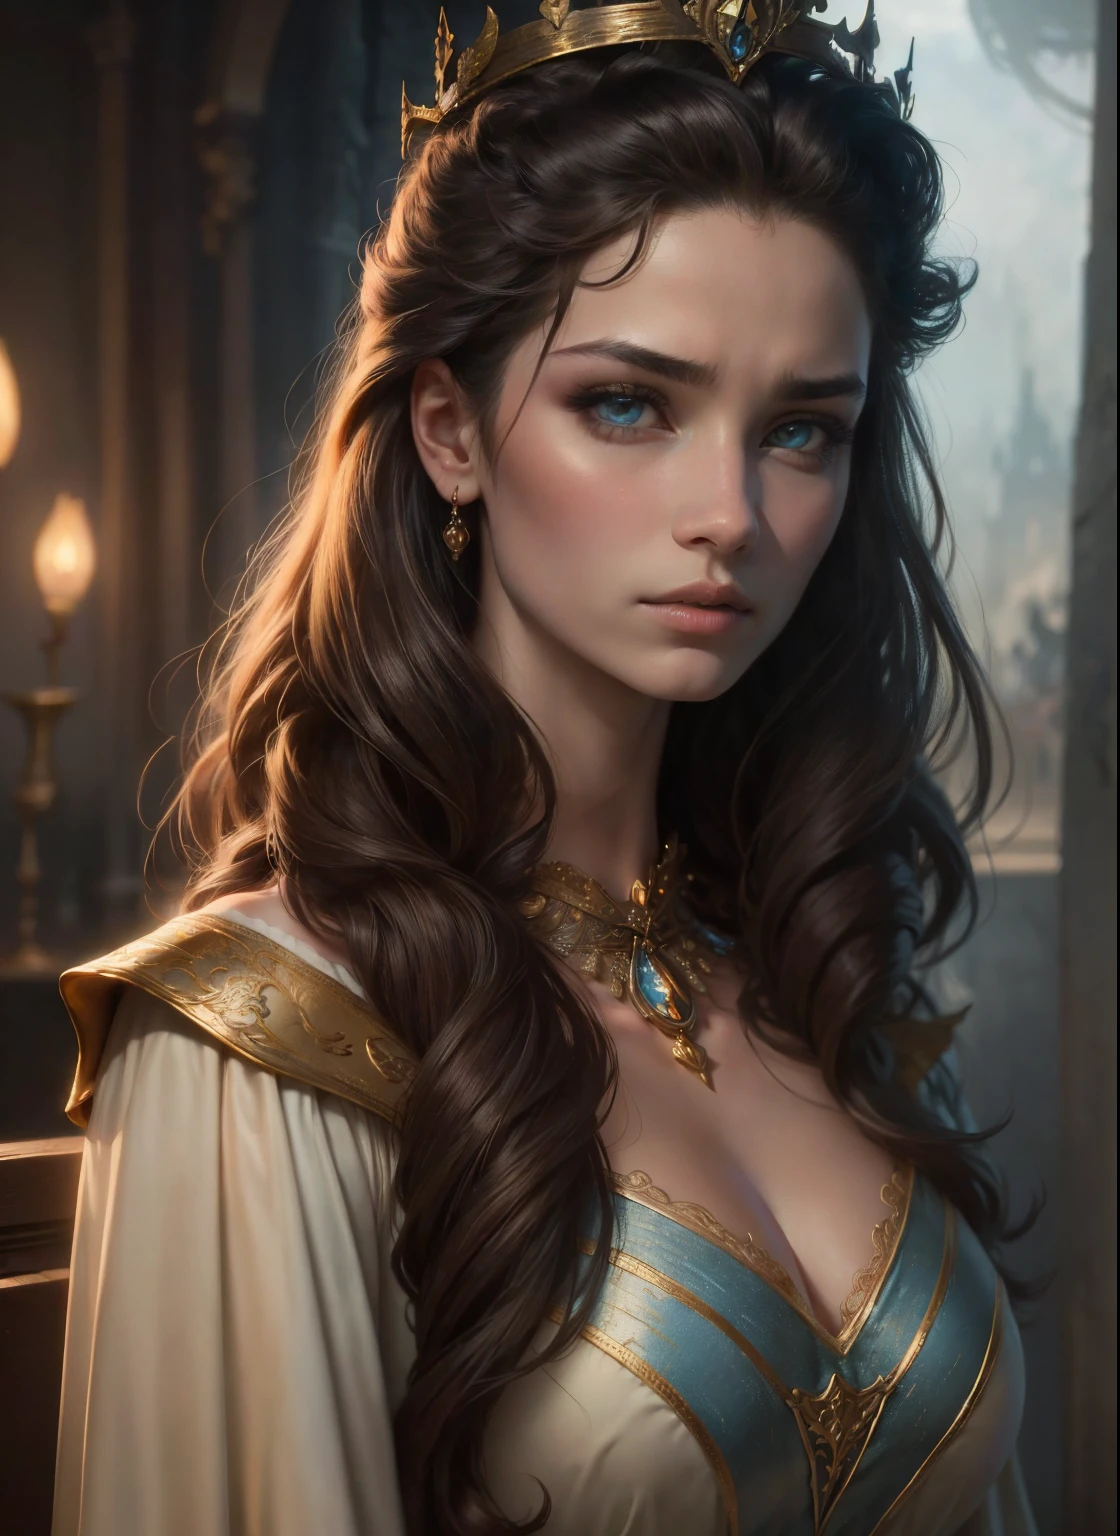 One girl、PRİNCESS、Confused、Worried look、long flowing hair、Beautiful and detailed eyes、Beautiful and detailed lips、crown、elegant dresses、Intricate details、Dramatic lighting、cinematic、Fantasy、digital art、Extremely detailed、8K、masterpiece、Photorealistic、Dramatic colors、cinematic照明